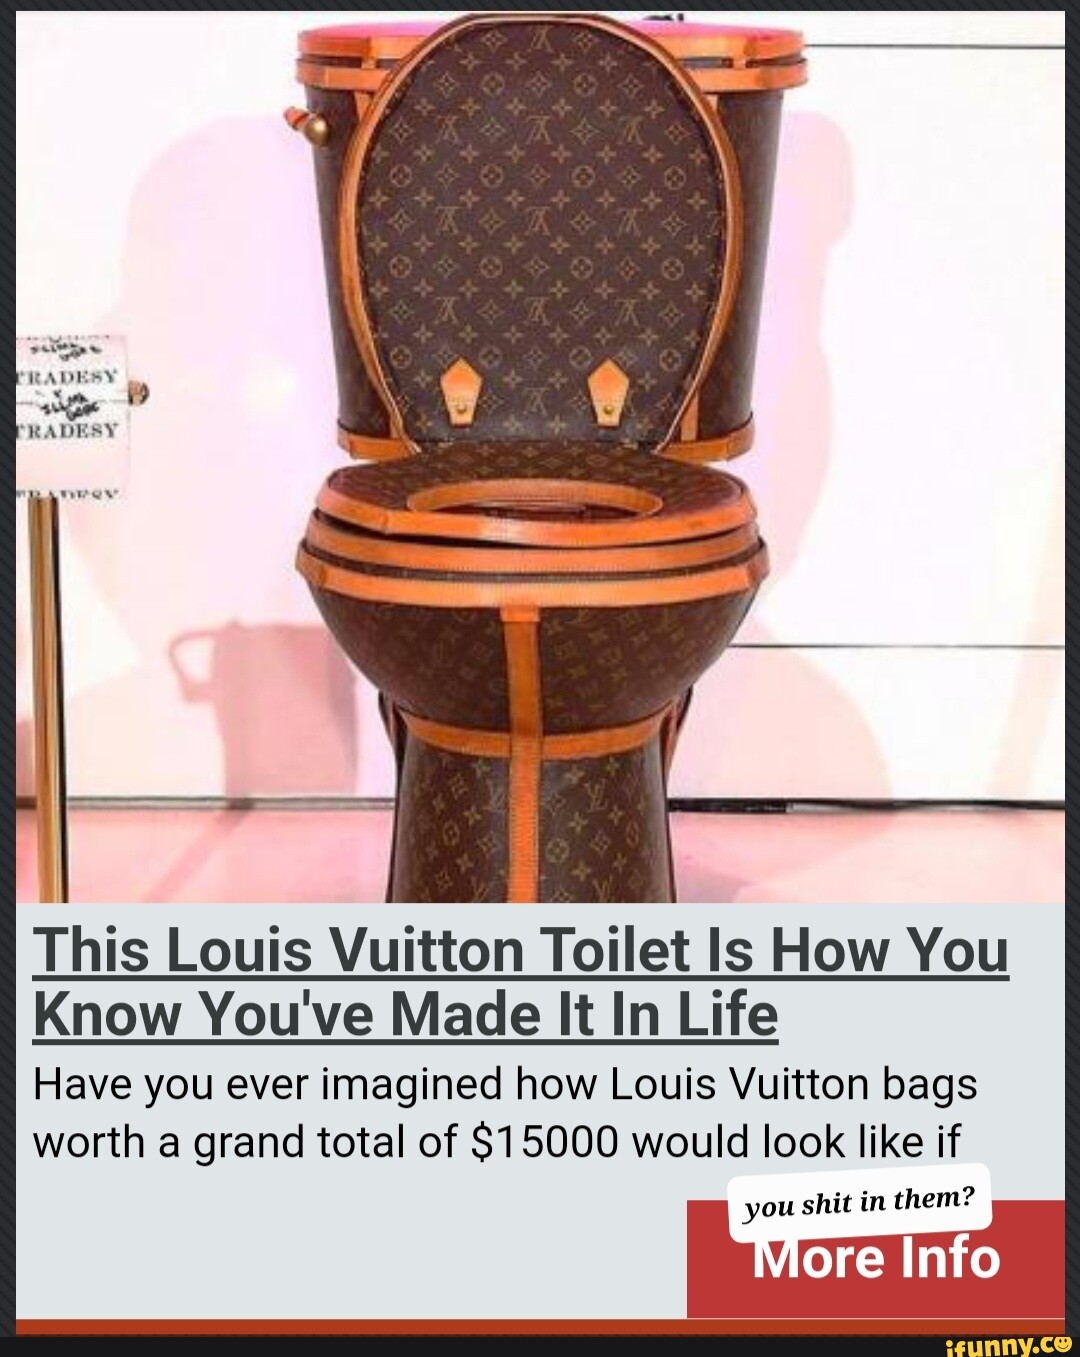 PRADESY This Louis Vuitton Toilet Is How You Know You've Made It